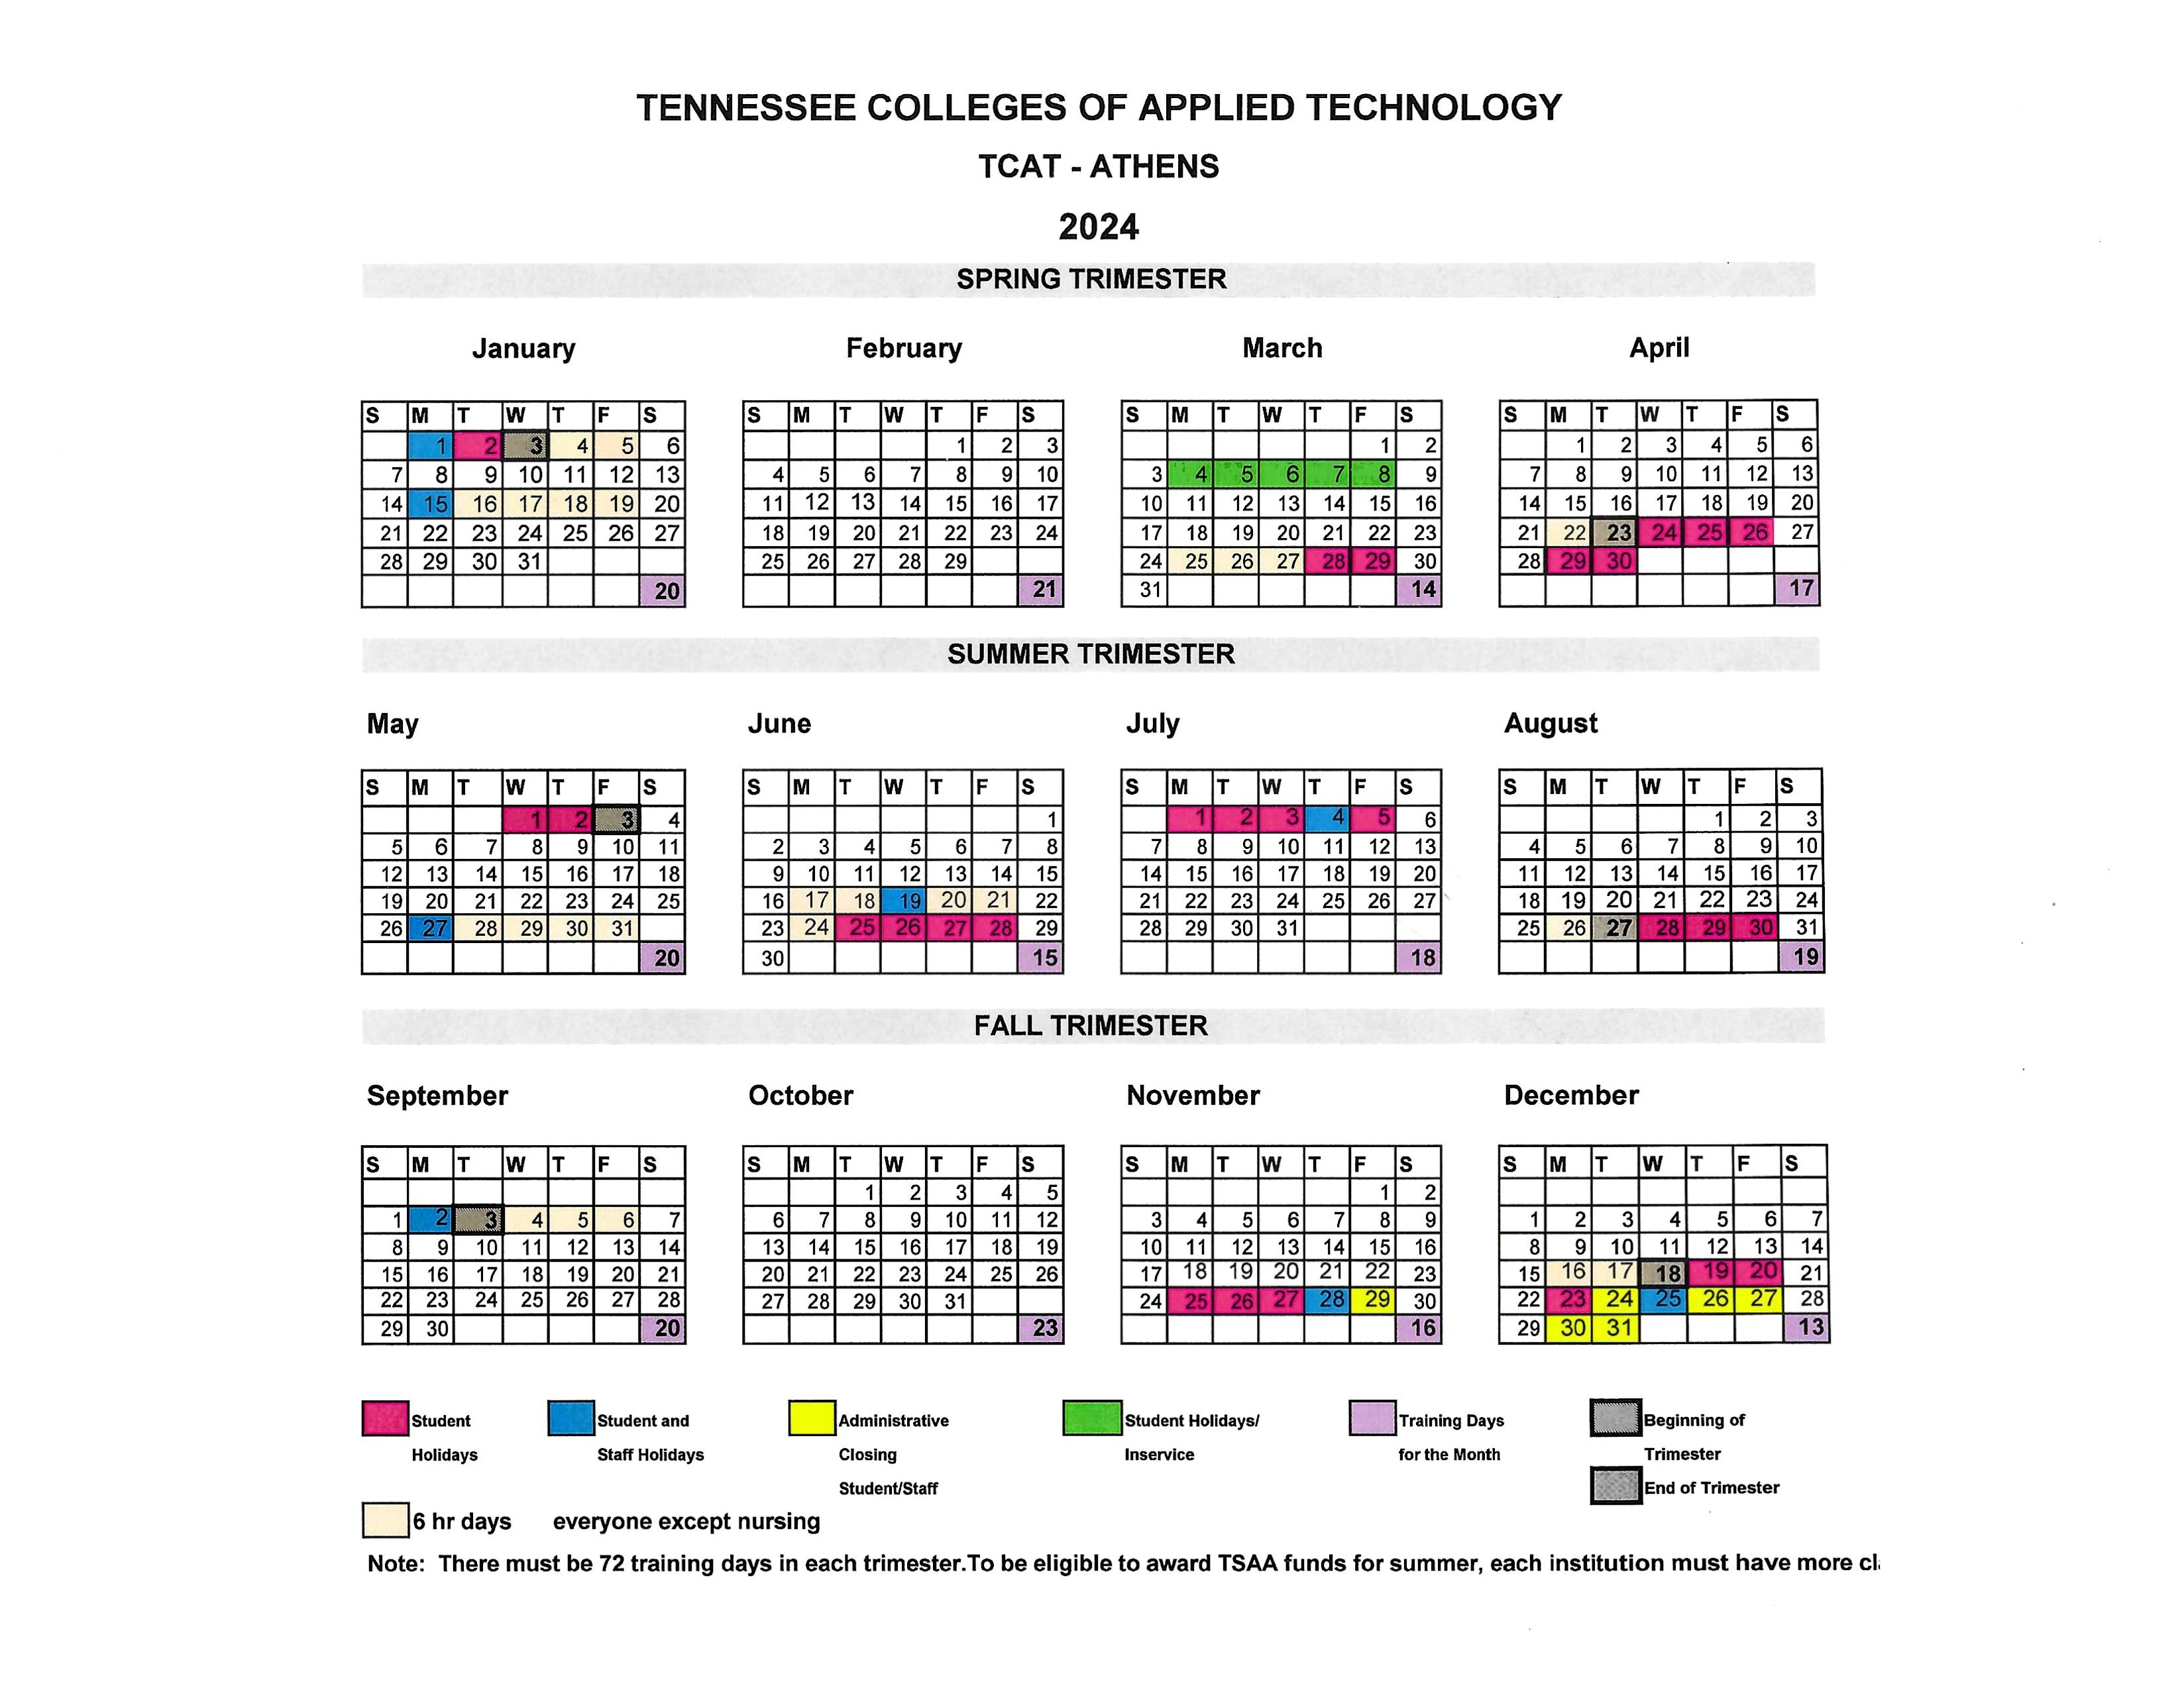 A calendar showing the schedule for the Tennessee College of Applied Technology in Athens, TN for the year 2024.